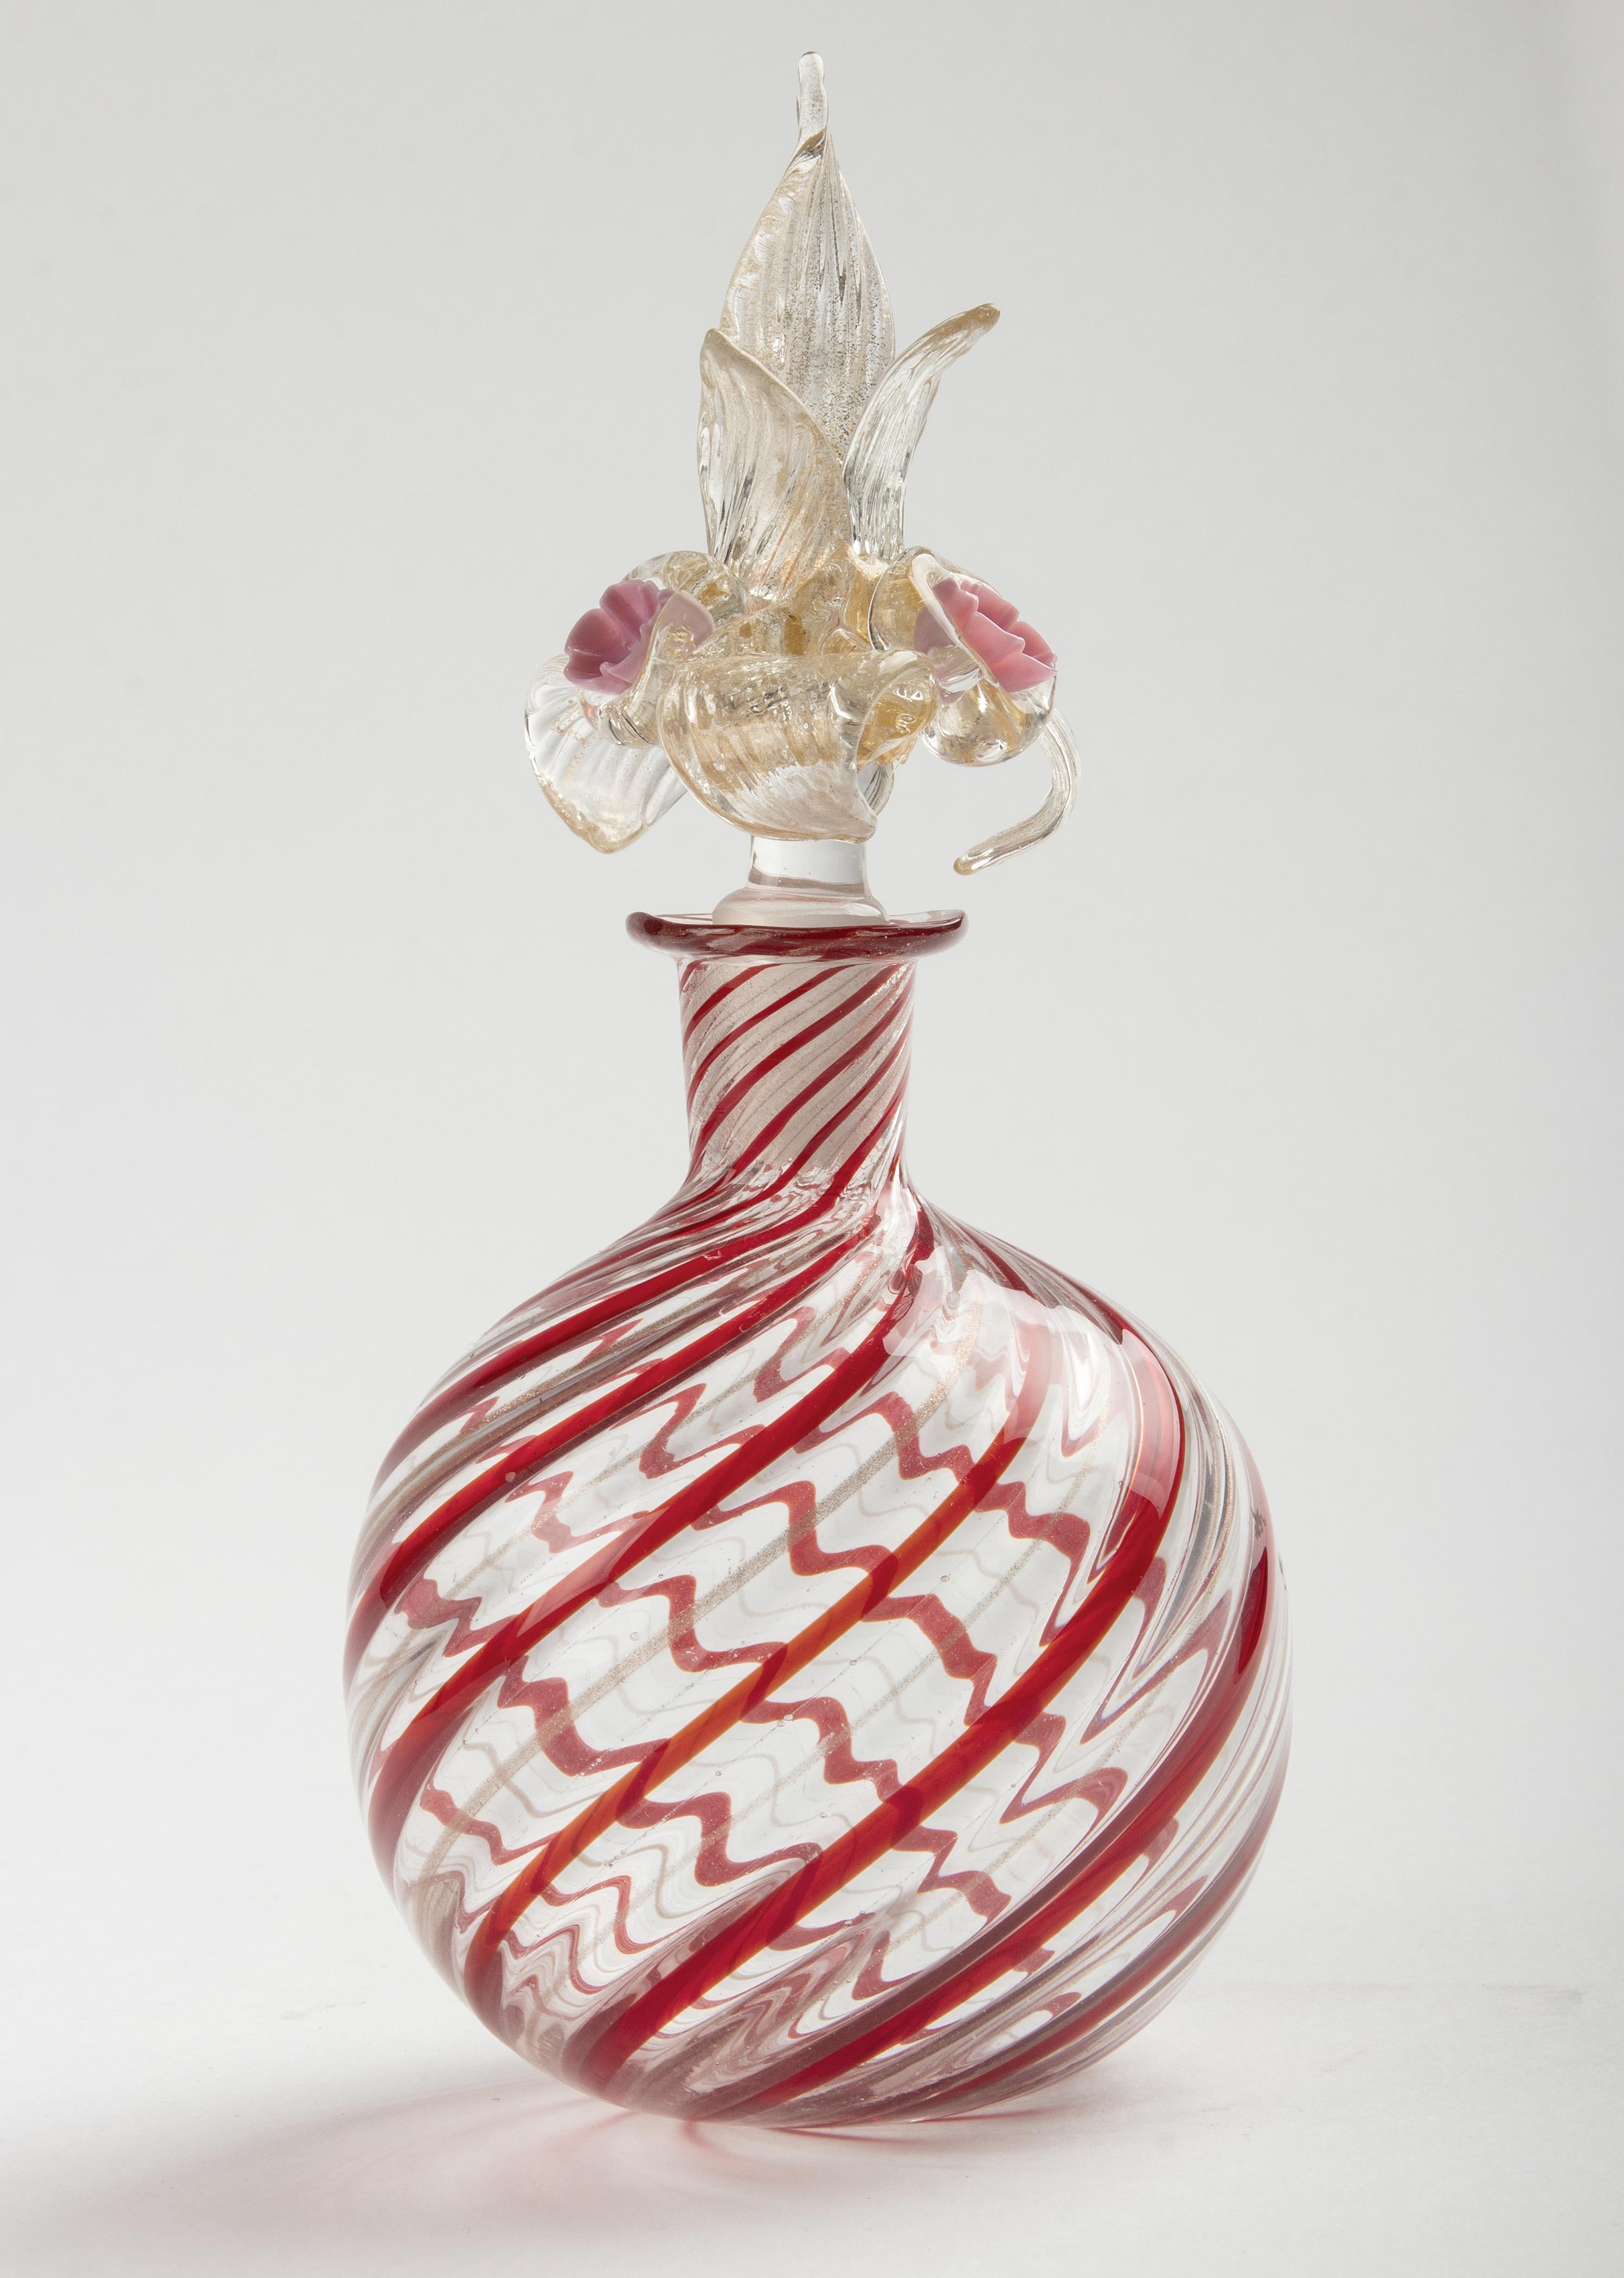 Beautiful old Murano glass bottle. The bottle has red swirls with gold colored accents. The top is beautifully decorated, typically Murano, with delicate leaves and roses. In very good condition.